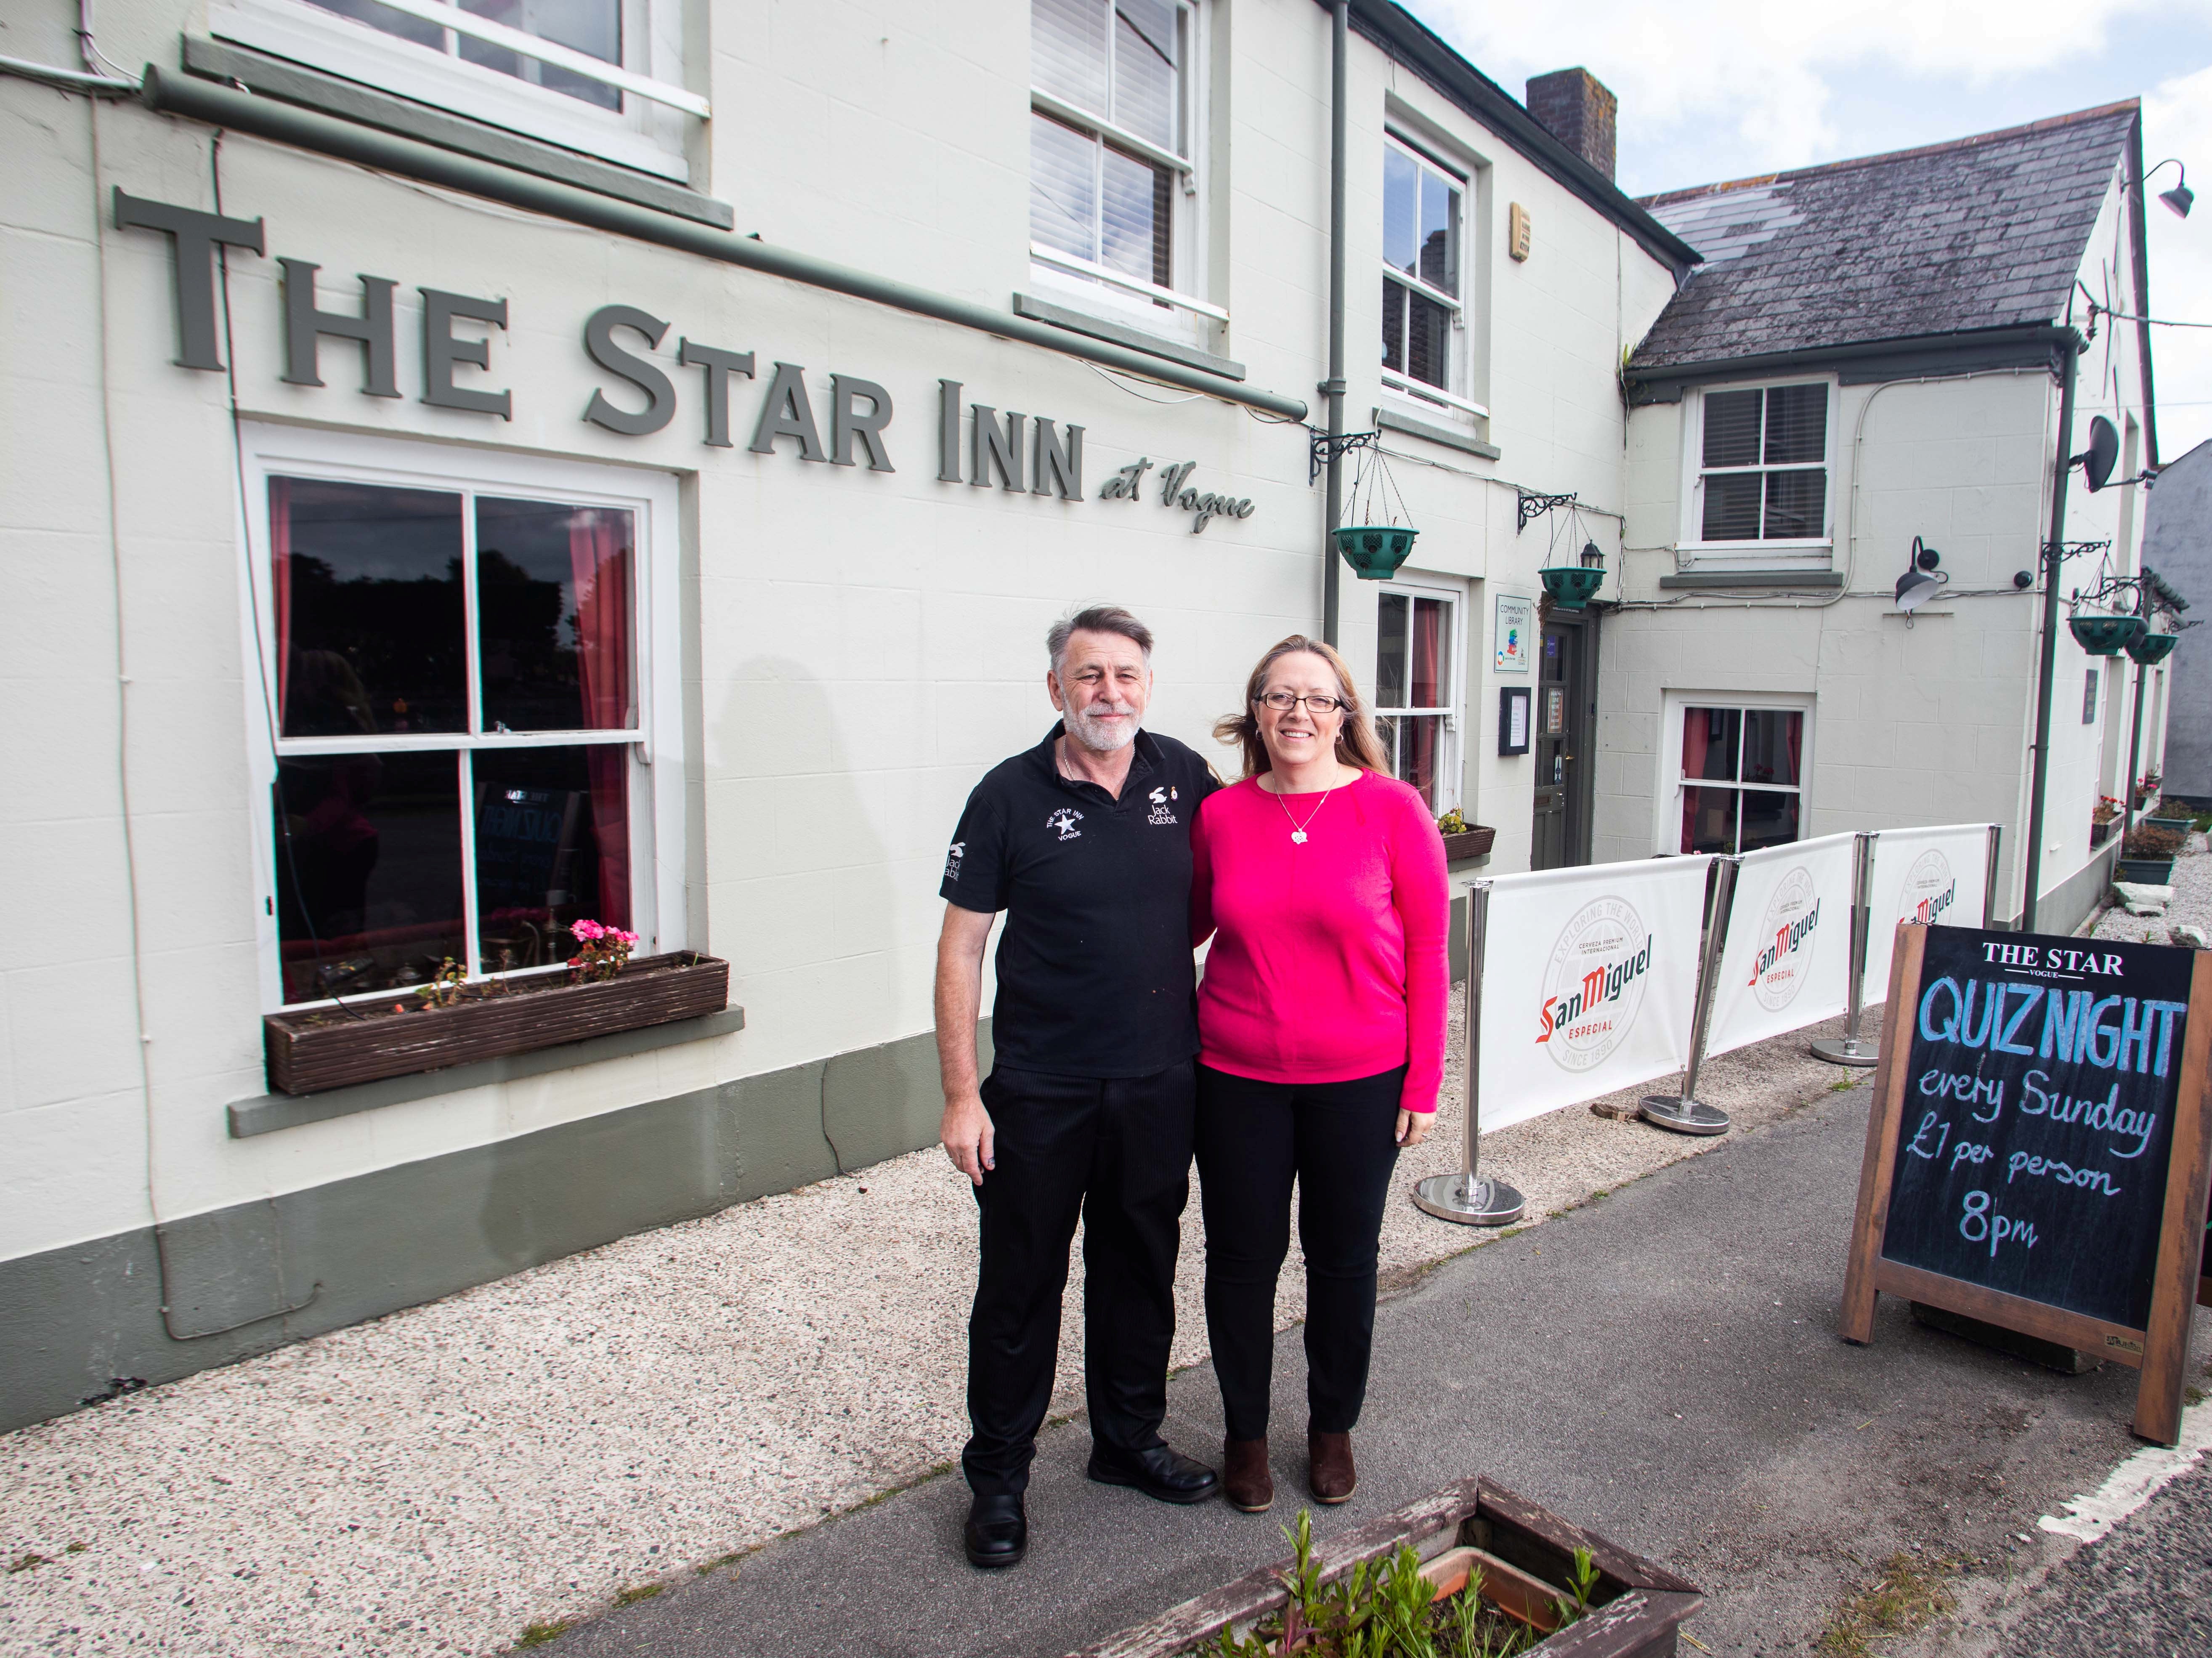 The couple have been running the pub for 17 years